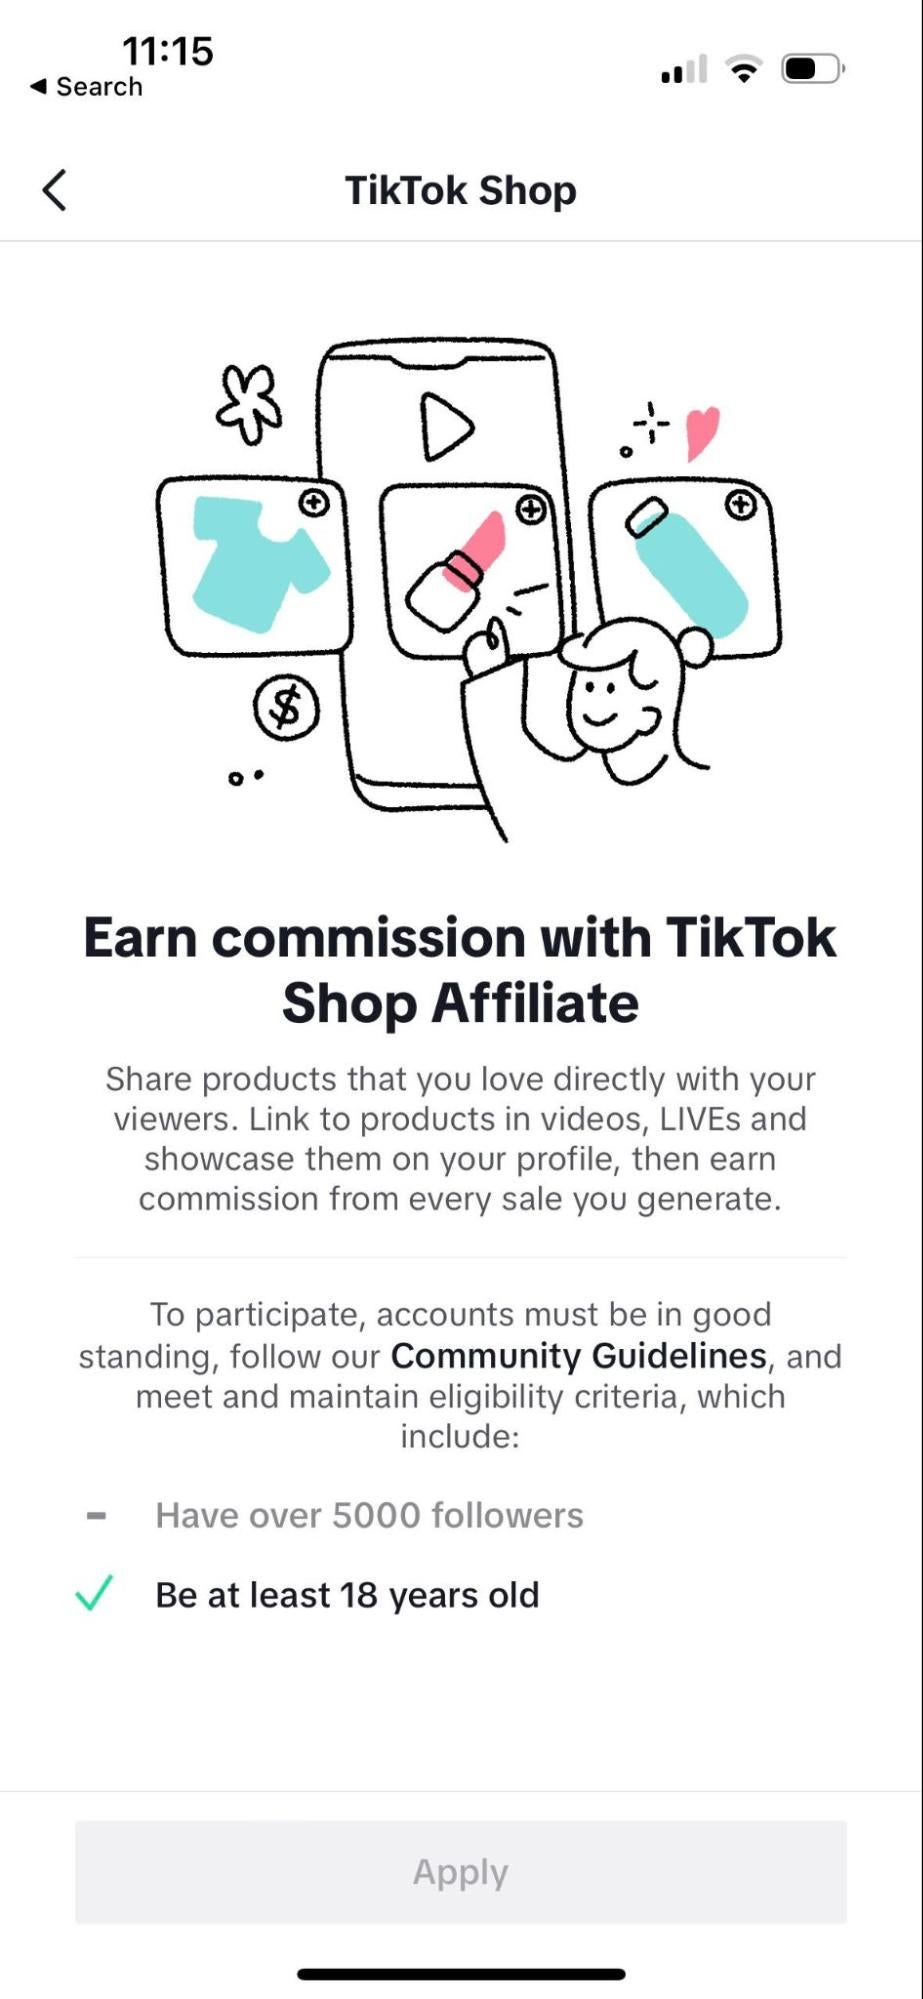 This is how you get to the #TikTokShop Affiliate centre to see all